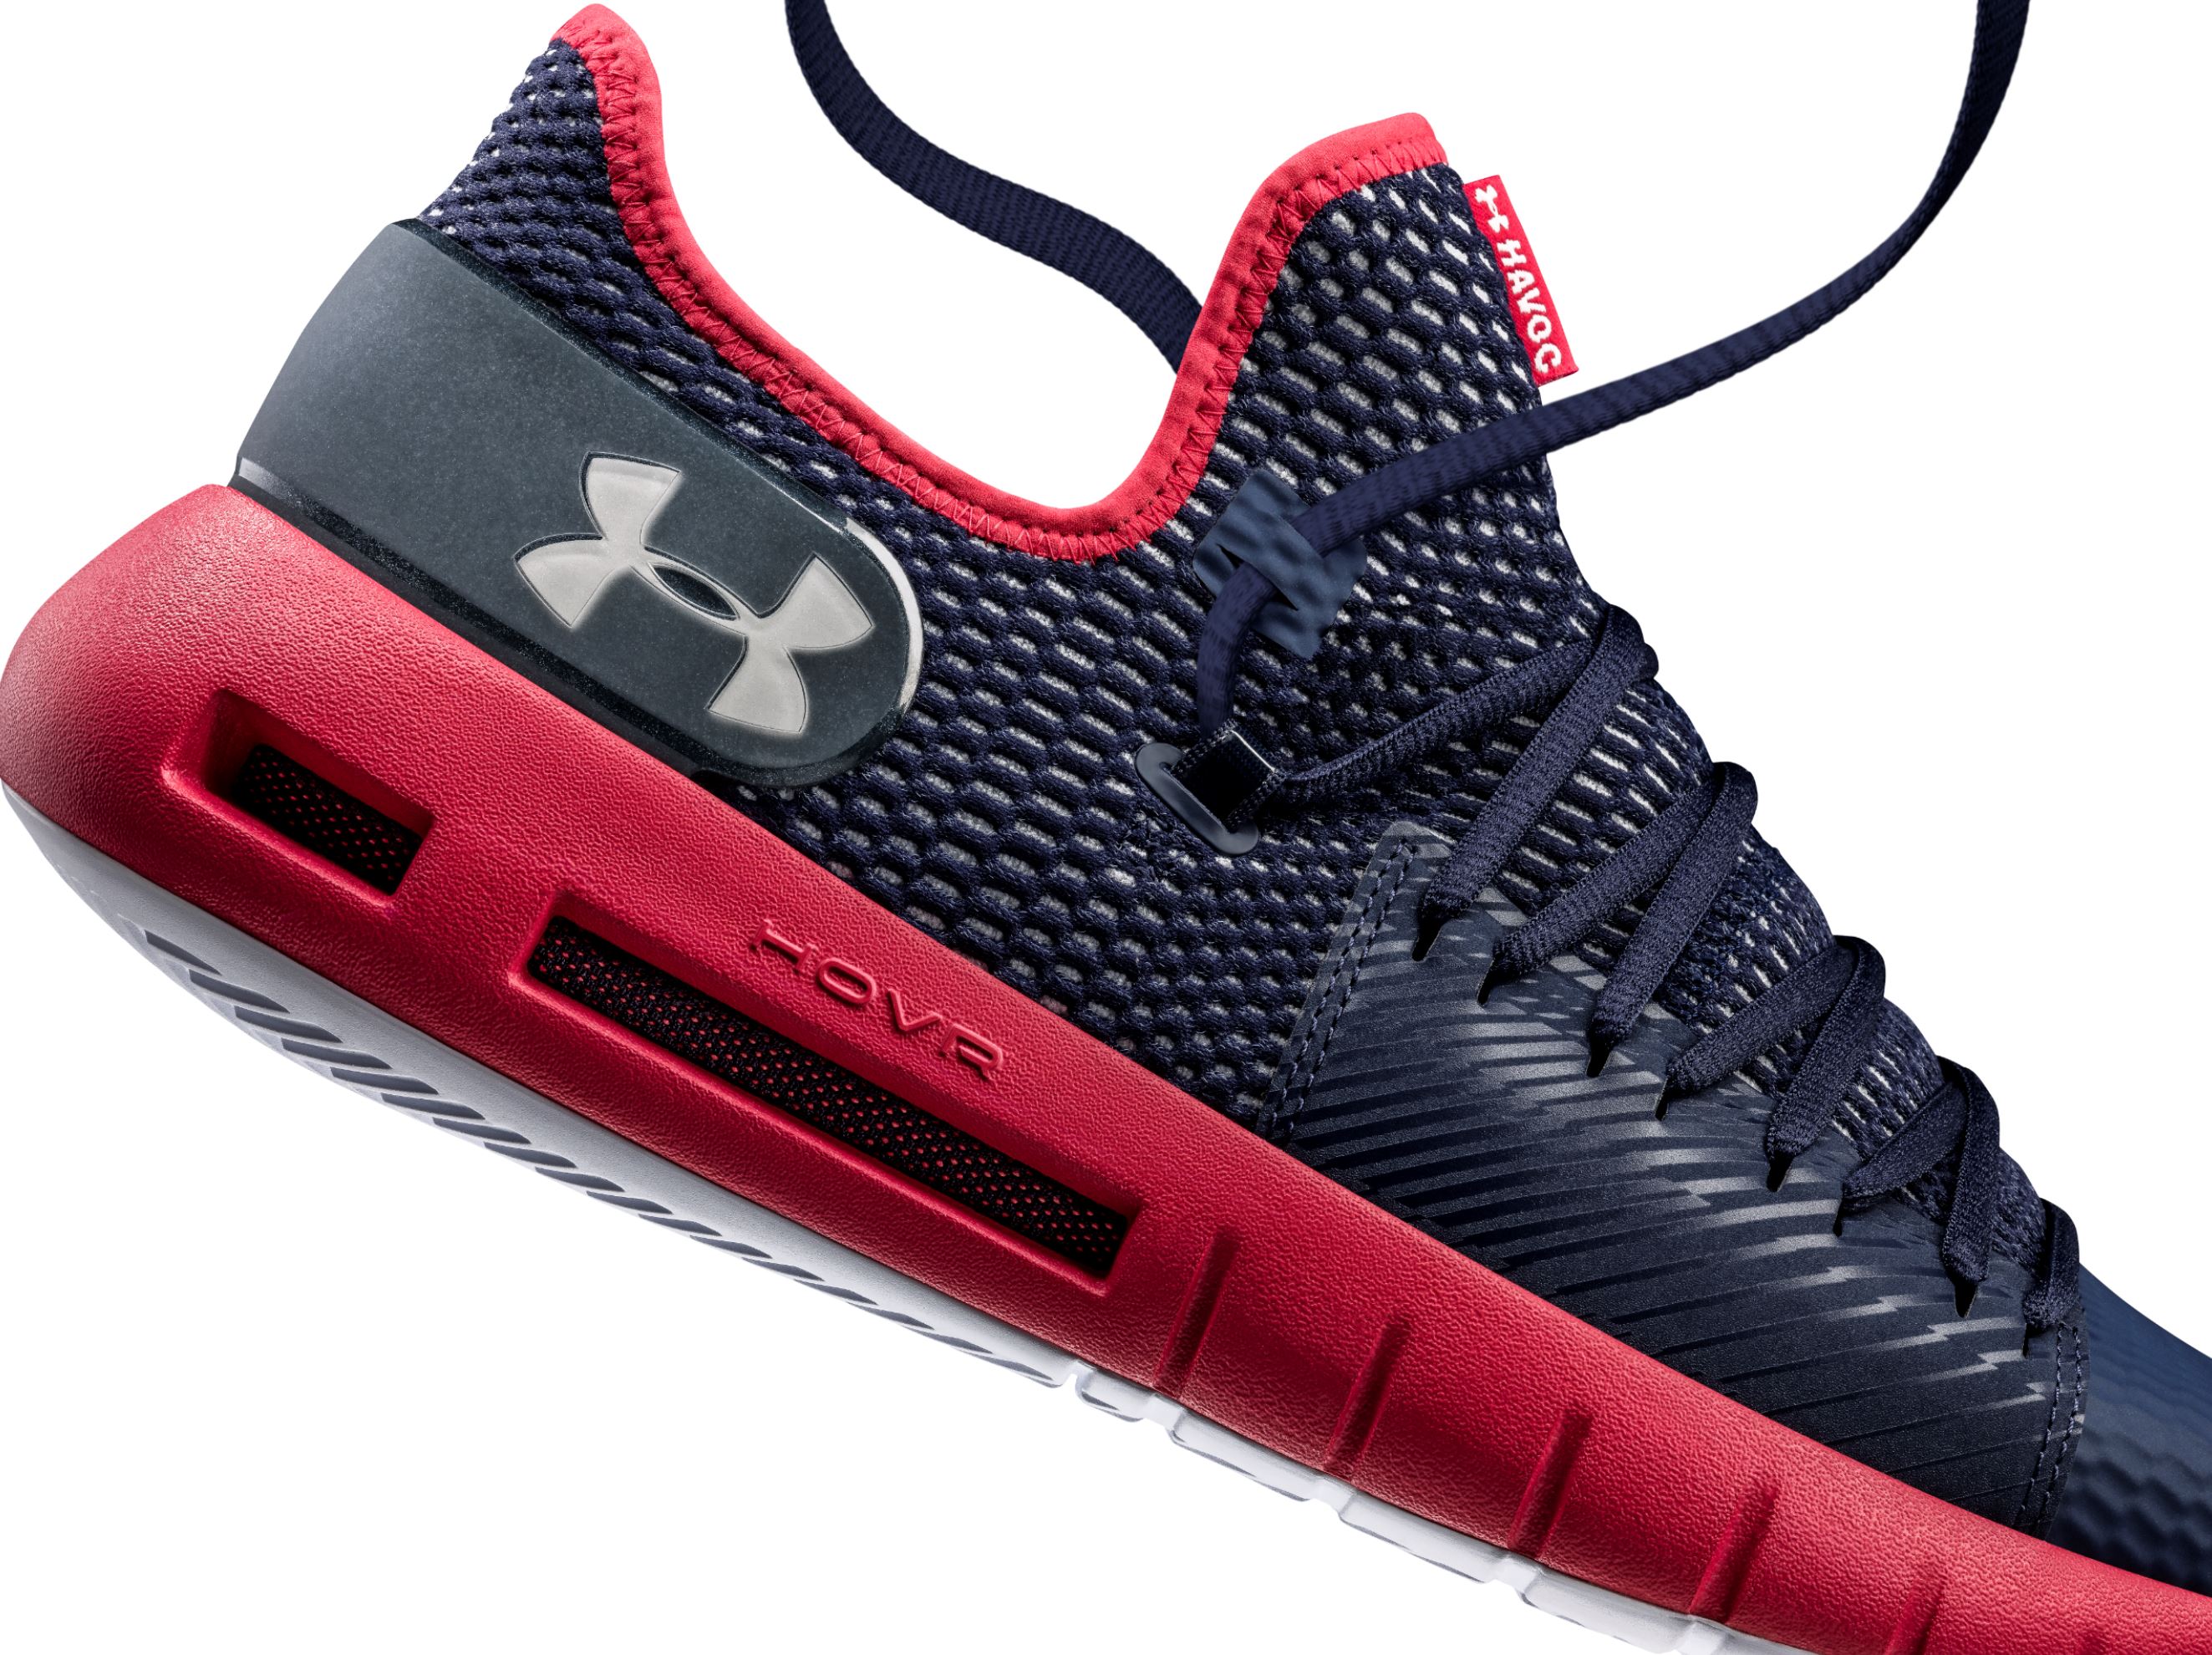 The Under Armour HOVR Havoc Will Drop 